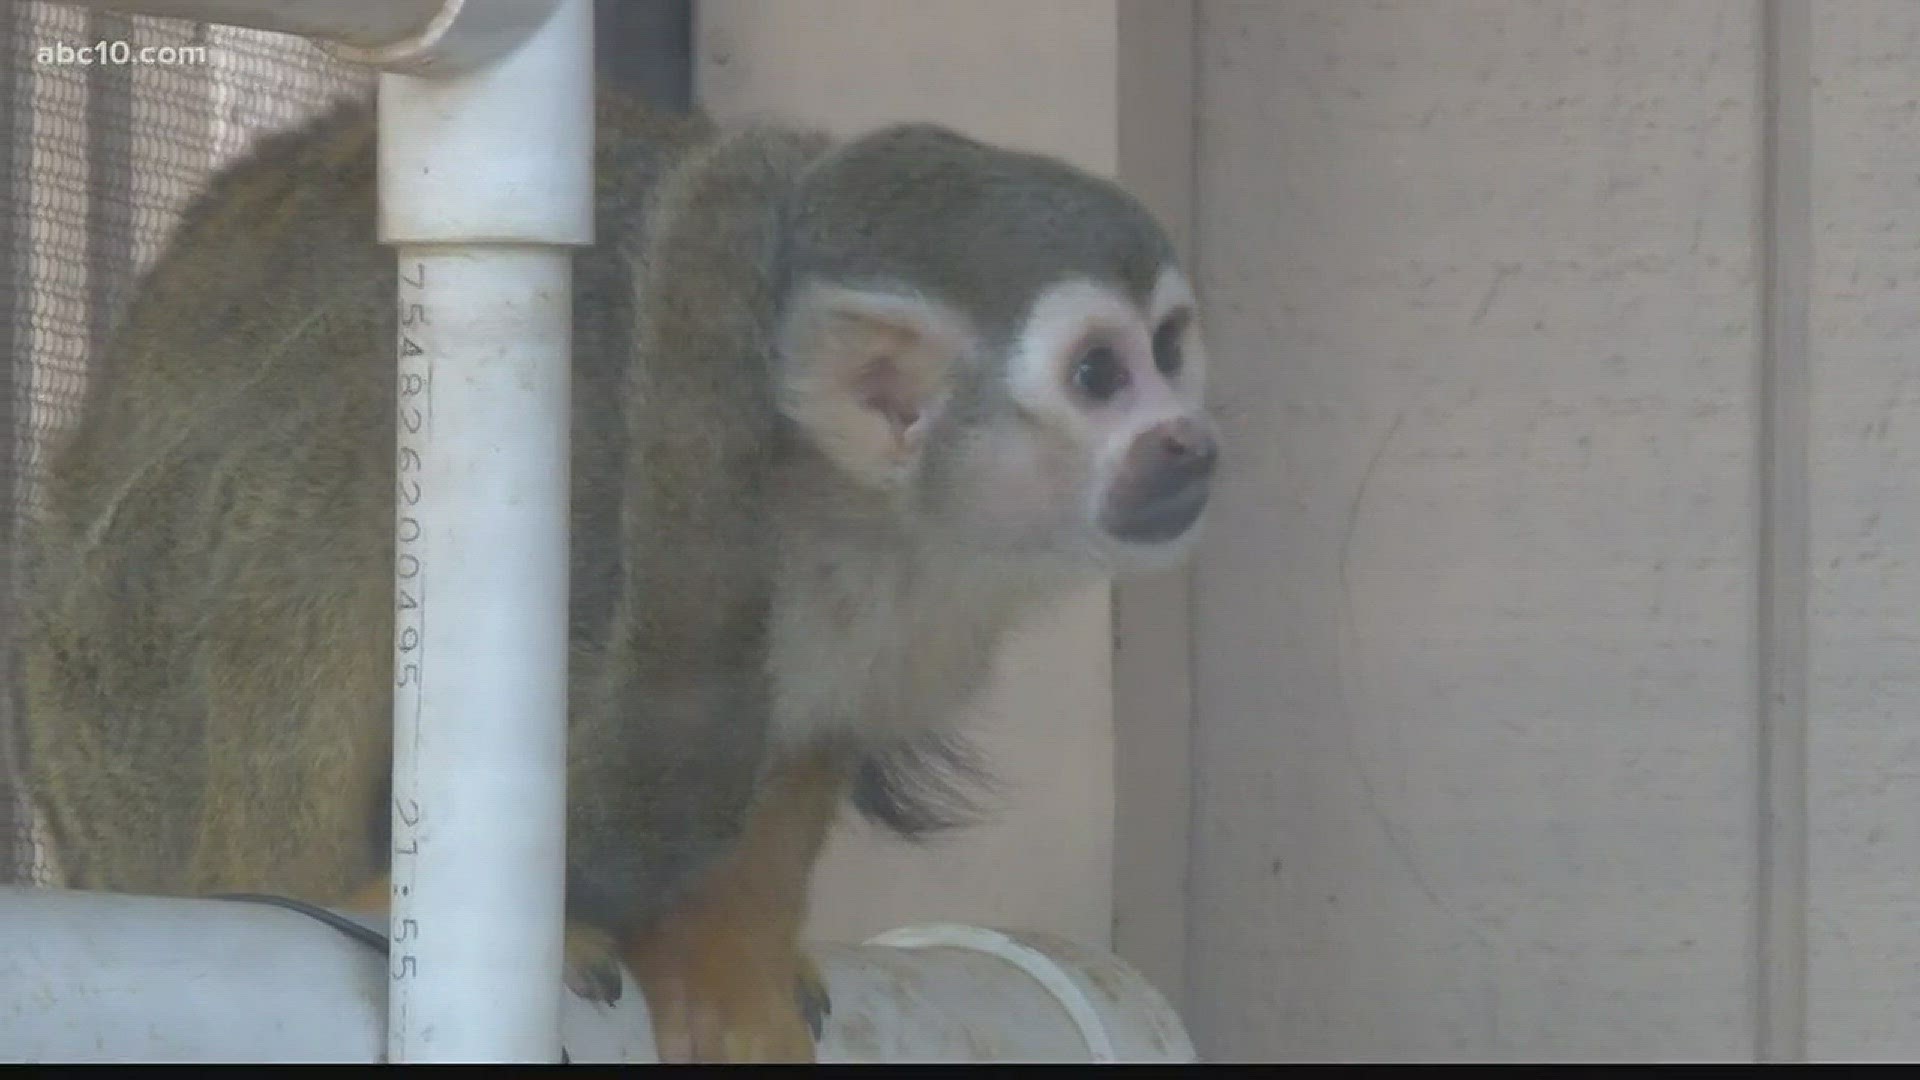 The Haven would house around 50 squirrel monkeys that are coming from a laboratory research facility. The haven is still in the permit process but, many community members do not want to see it go any further. (Oct. 20, 2017)